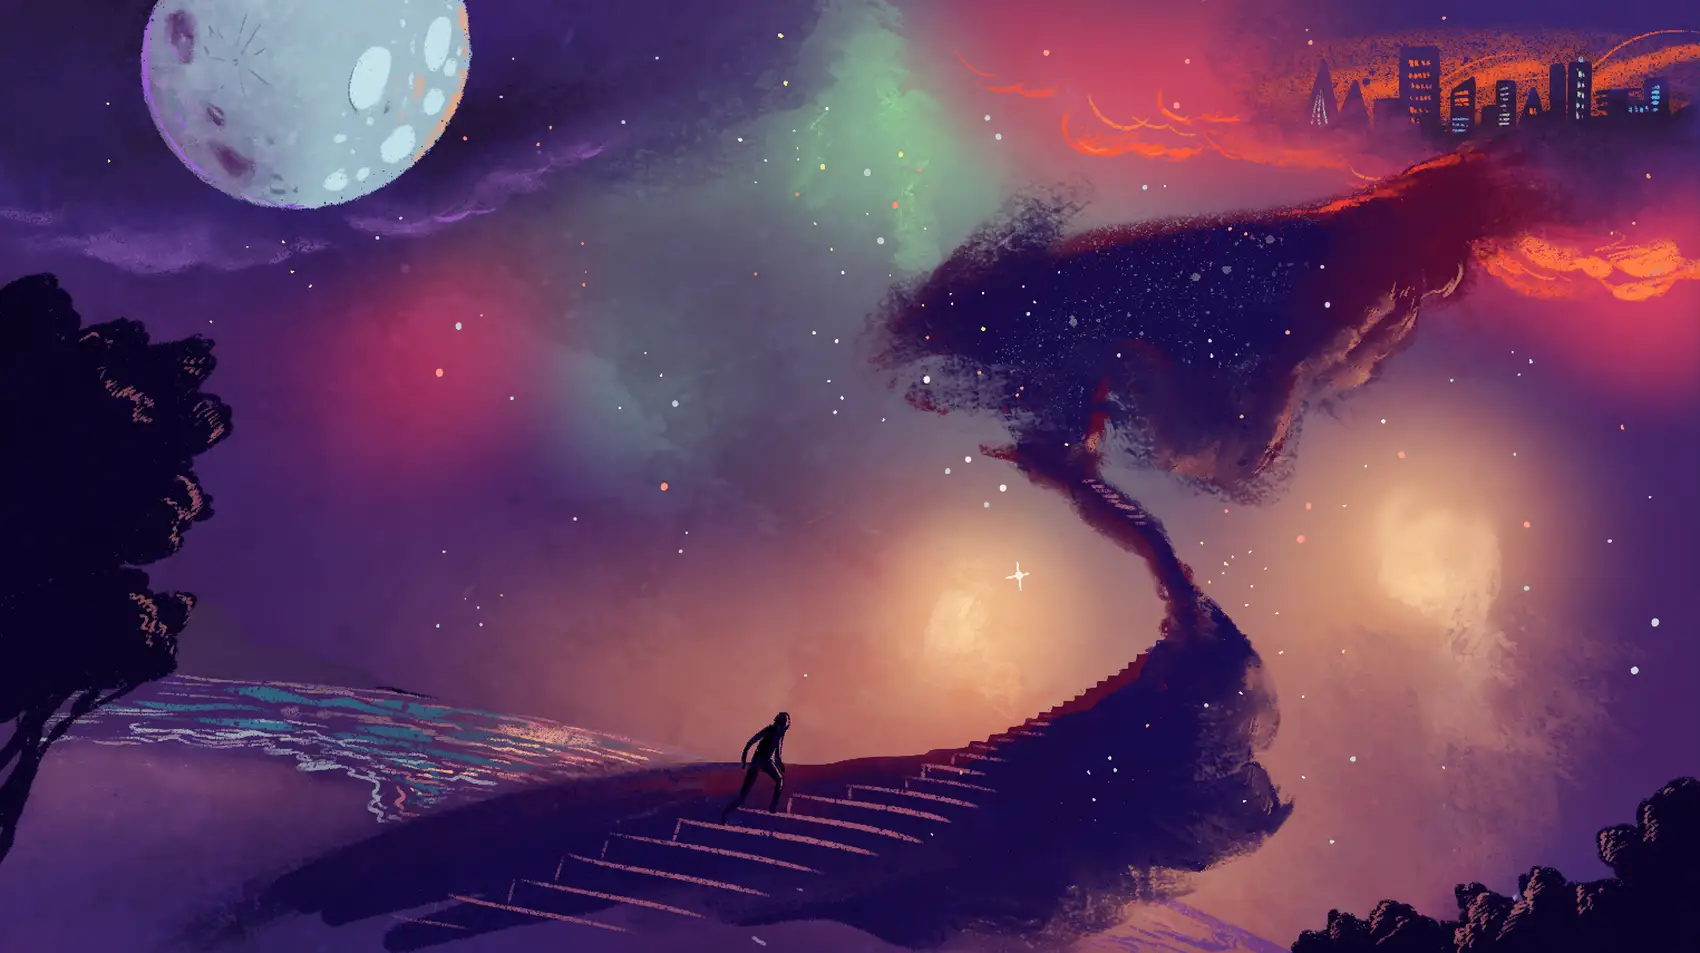 Two realms in a dark, yet brilliantly, colorfully lit galaxy, connected with a stepping bridge. A moon hangs above the bridge, as a figure crosses the bridge.